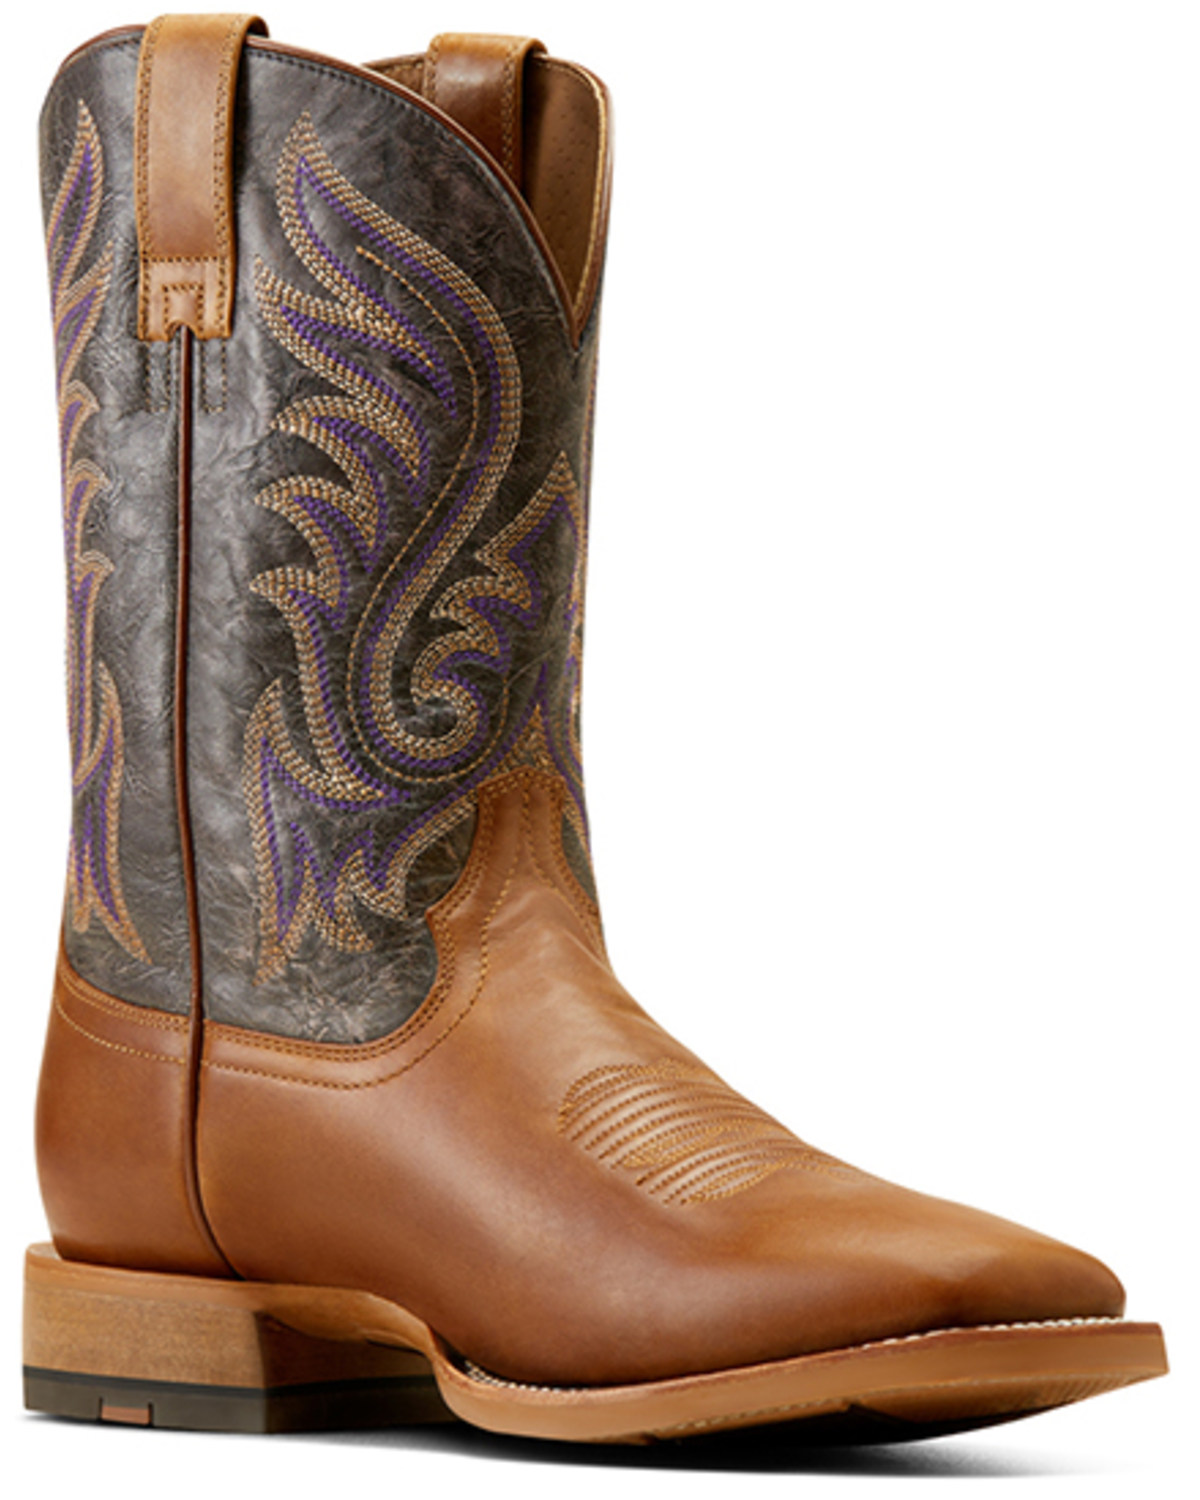 Ariat Men's Cattle Call Performance Western Boots - Broad Square Toe